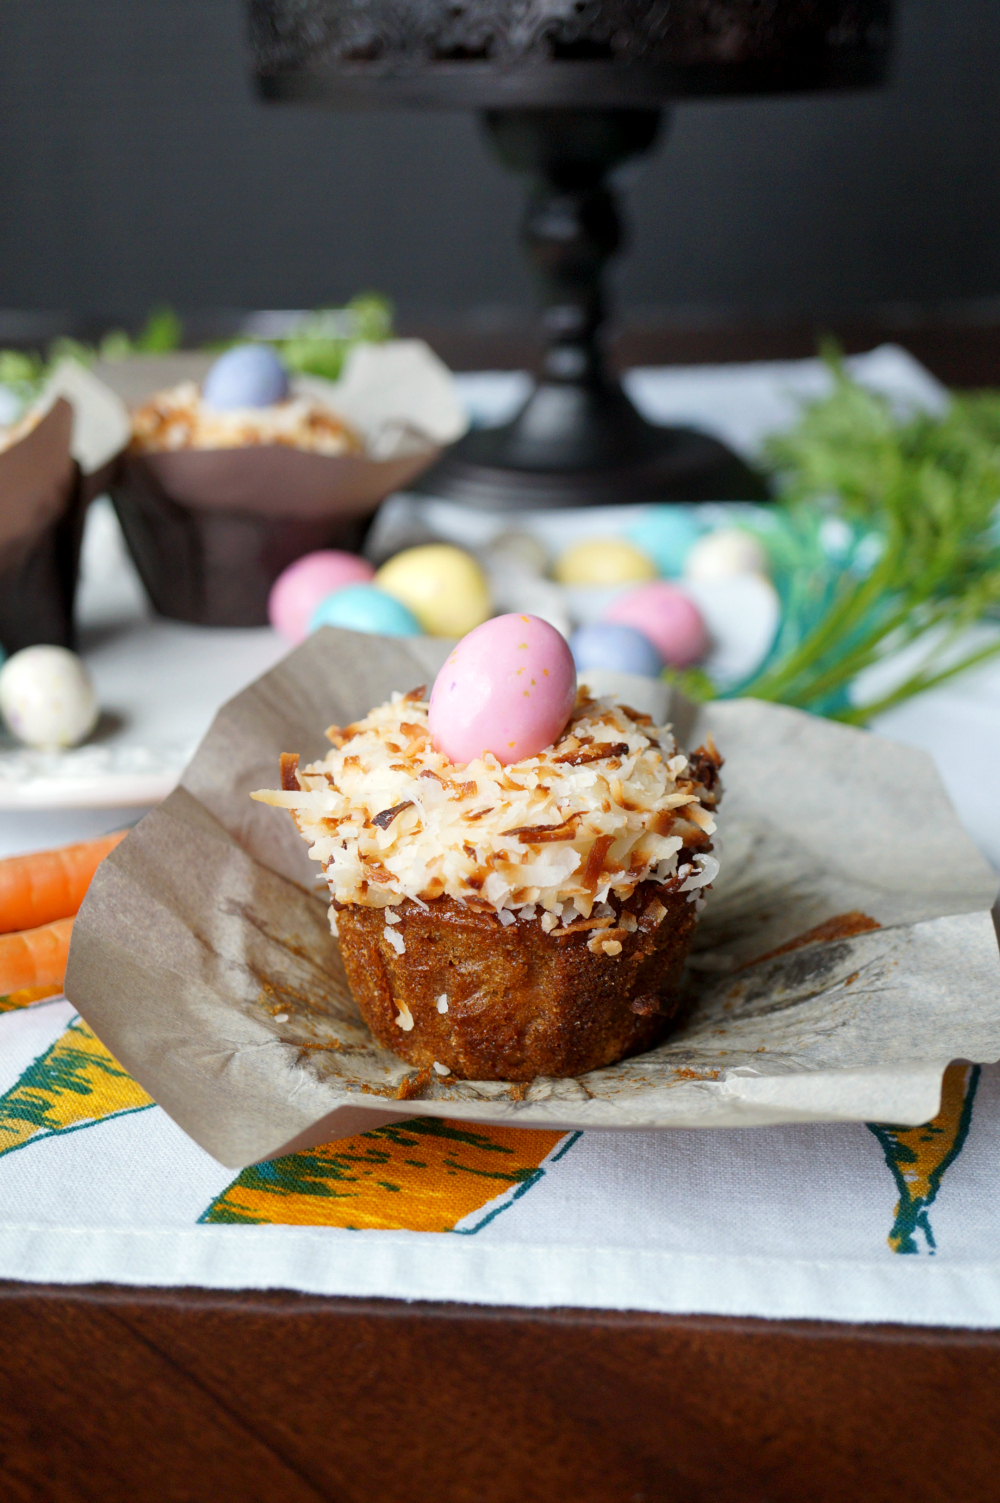 Coconut nest cupcakes with a colorful egg in the center